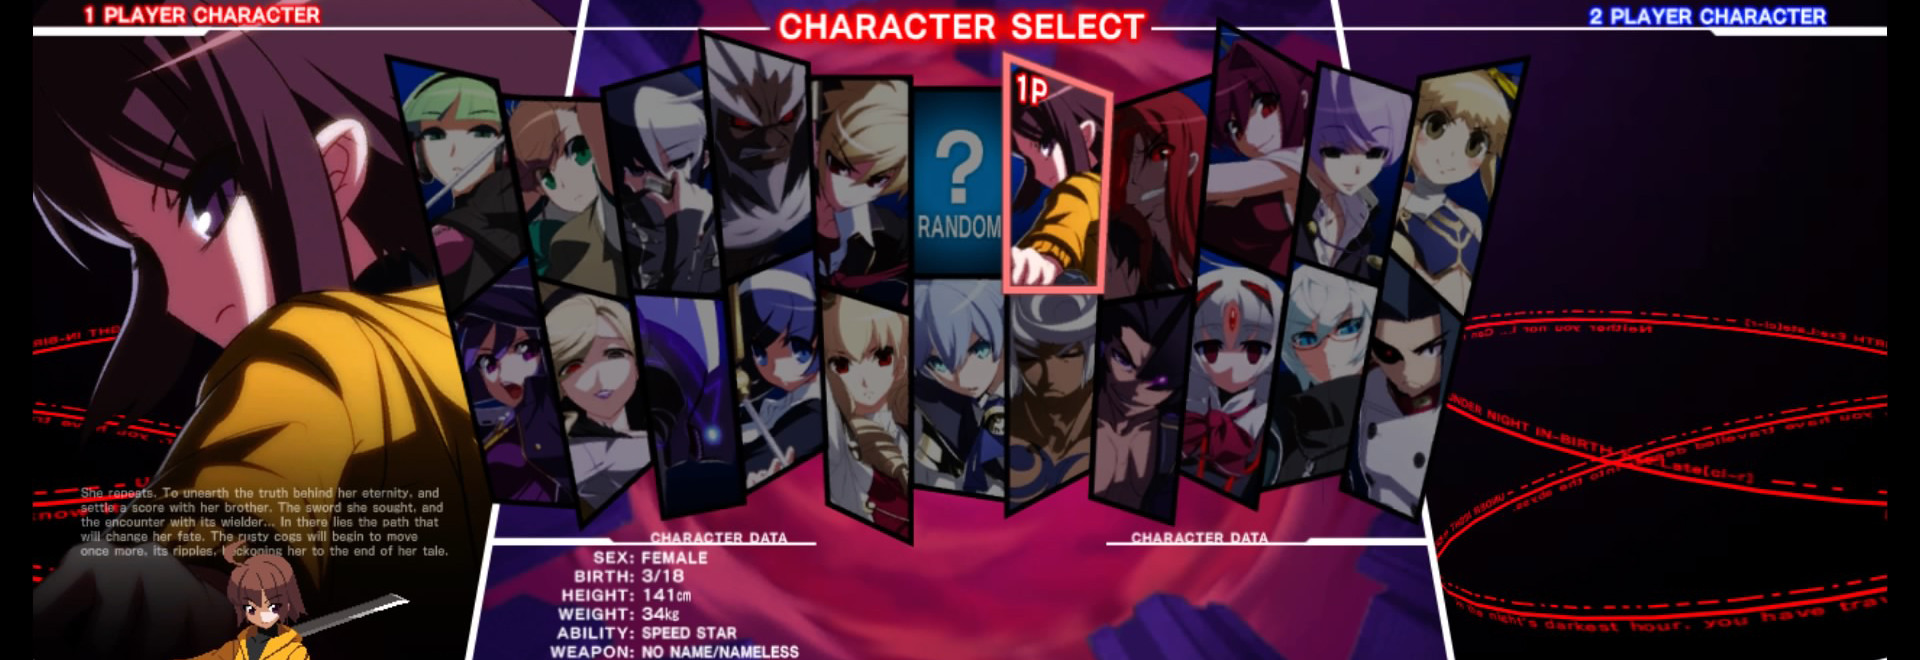 UNICLR Character Guide: How to Pick a Main